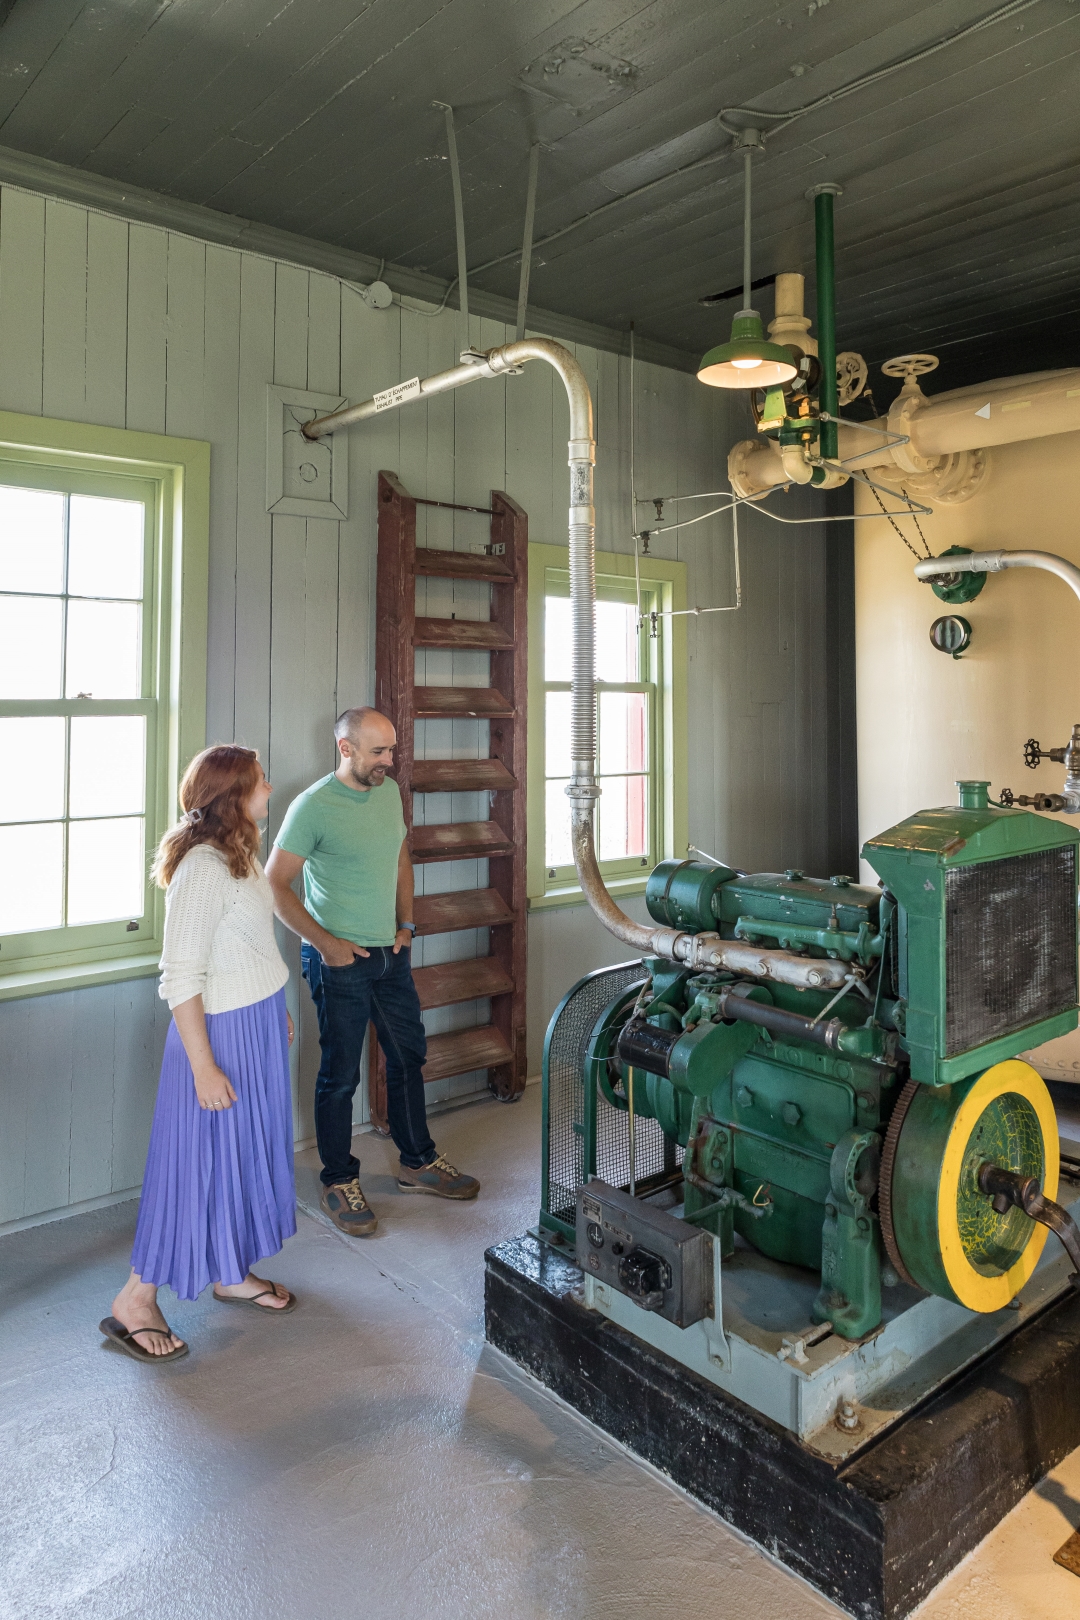 A couple examine a machine used to activate the foghorn.